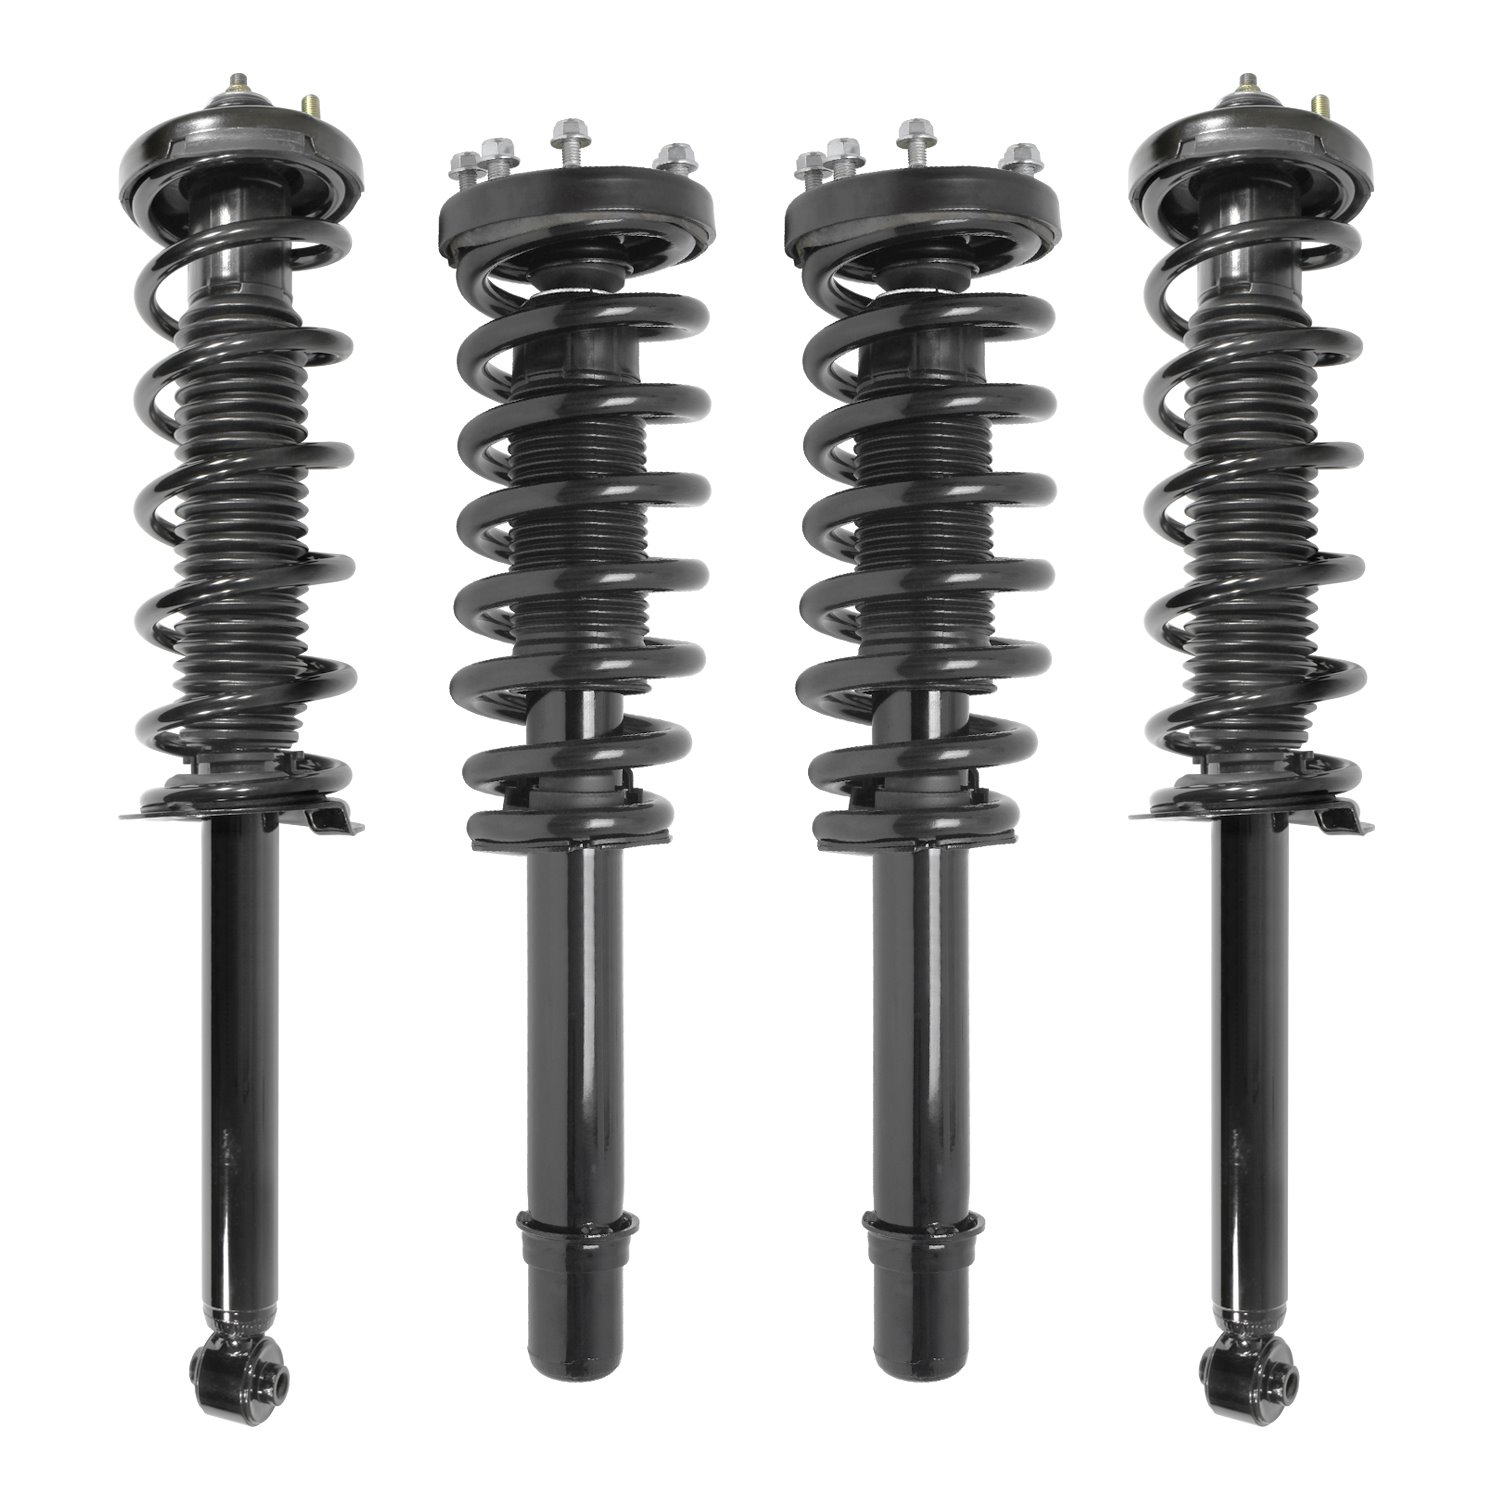 4-11940-15050-001 Front & Rear Suspension Strut & Coil Spring Assembly Kit Fits Select Acura TL